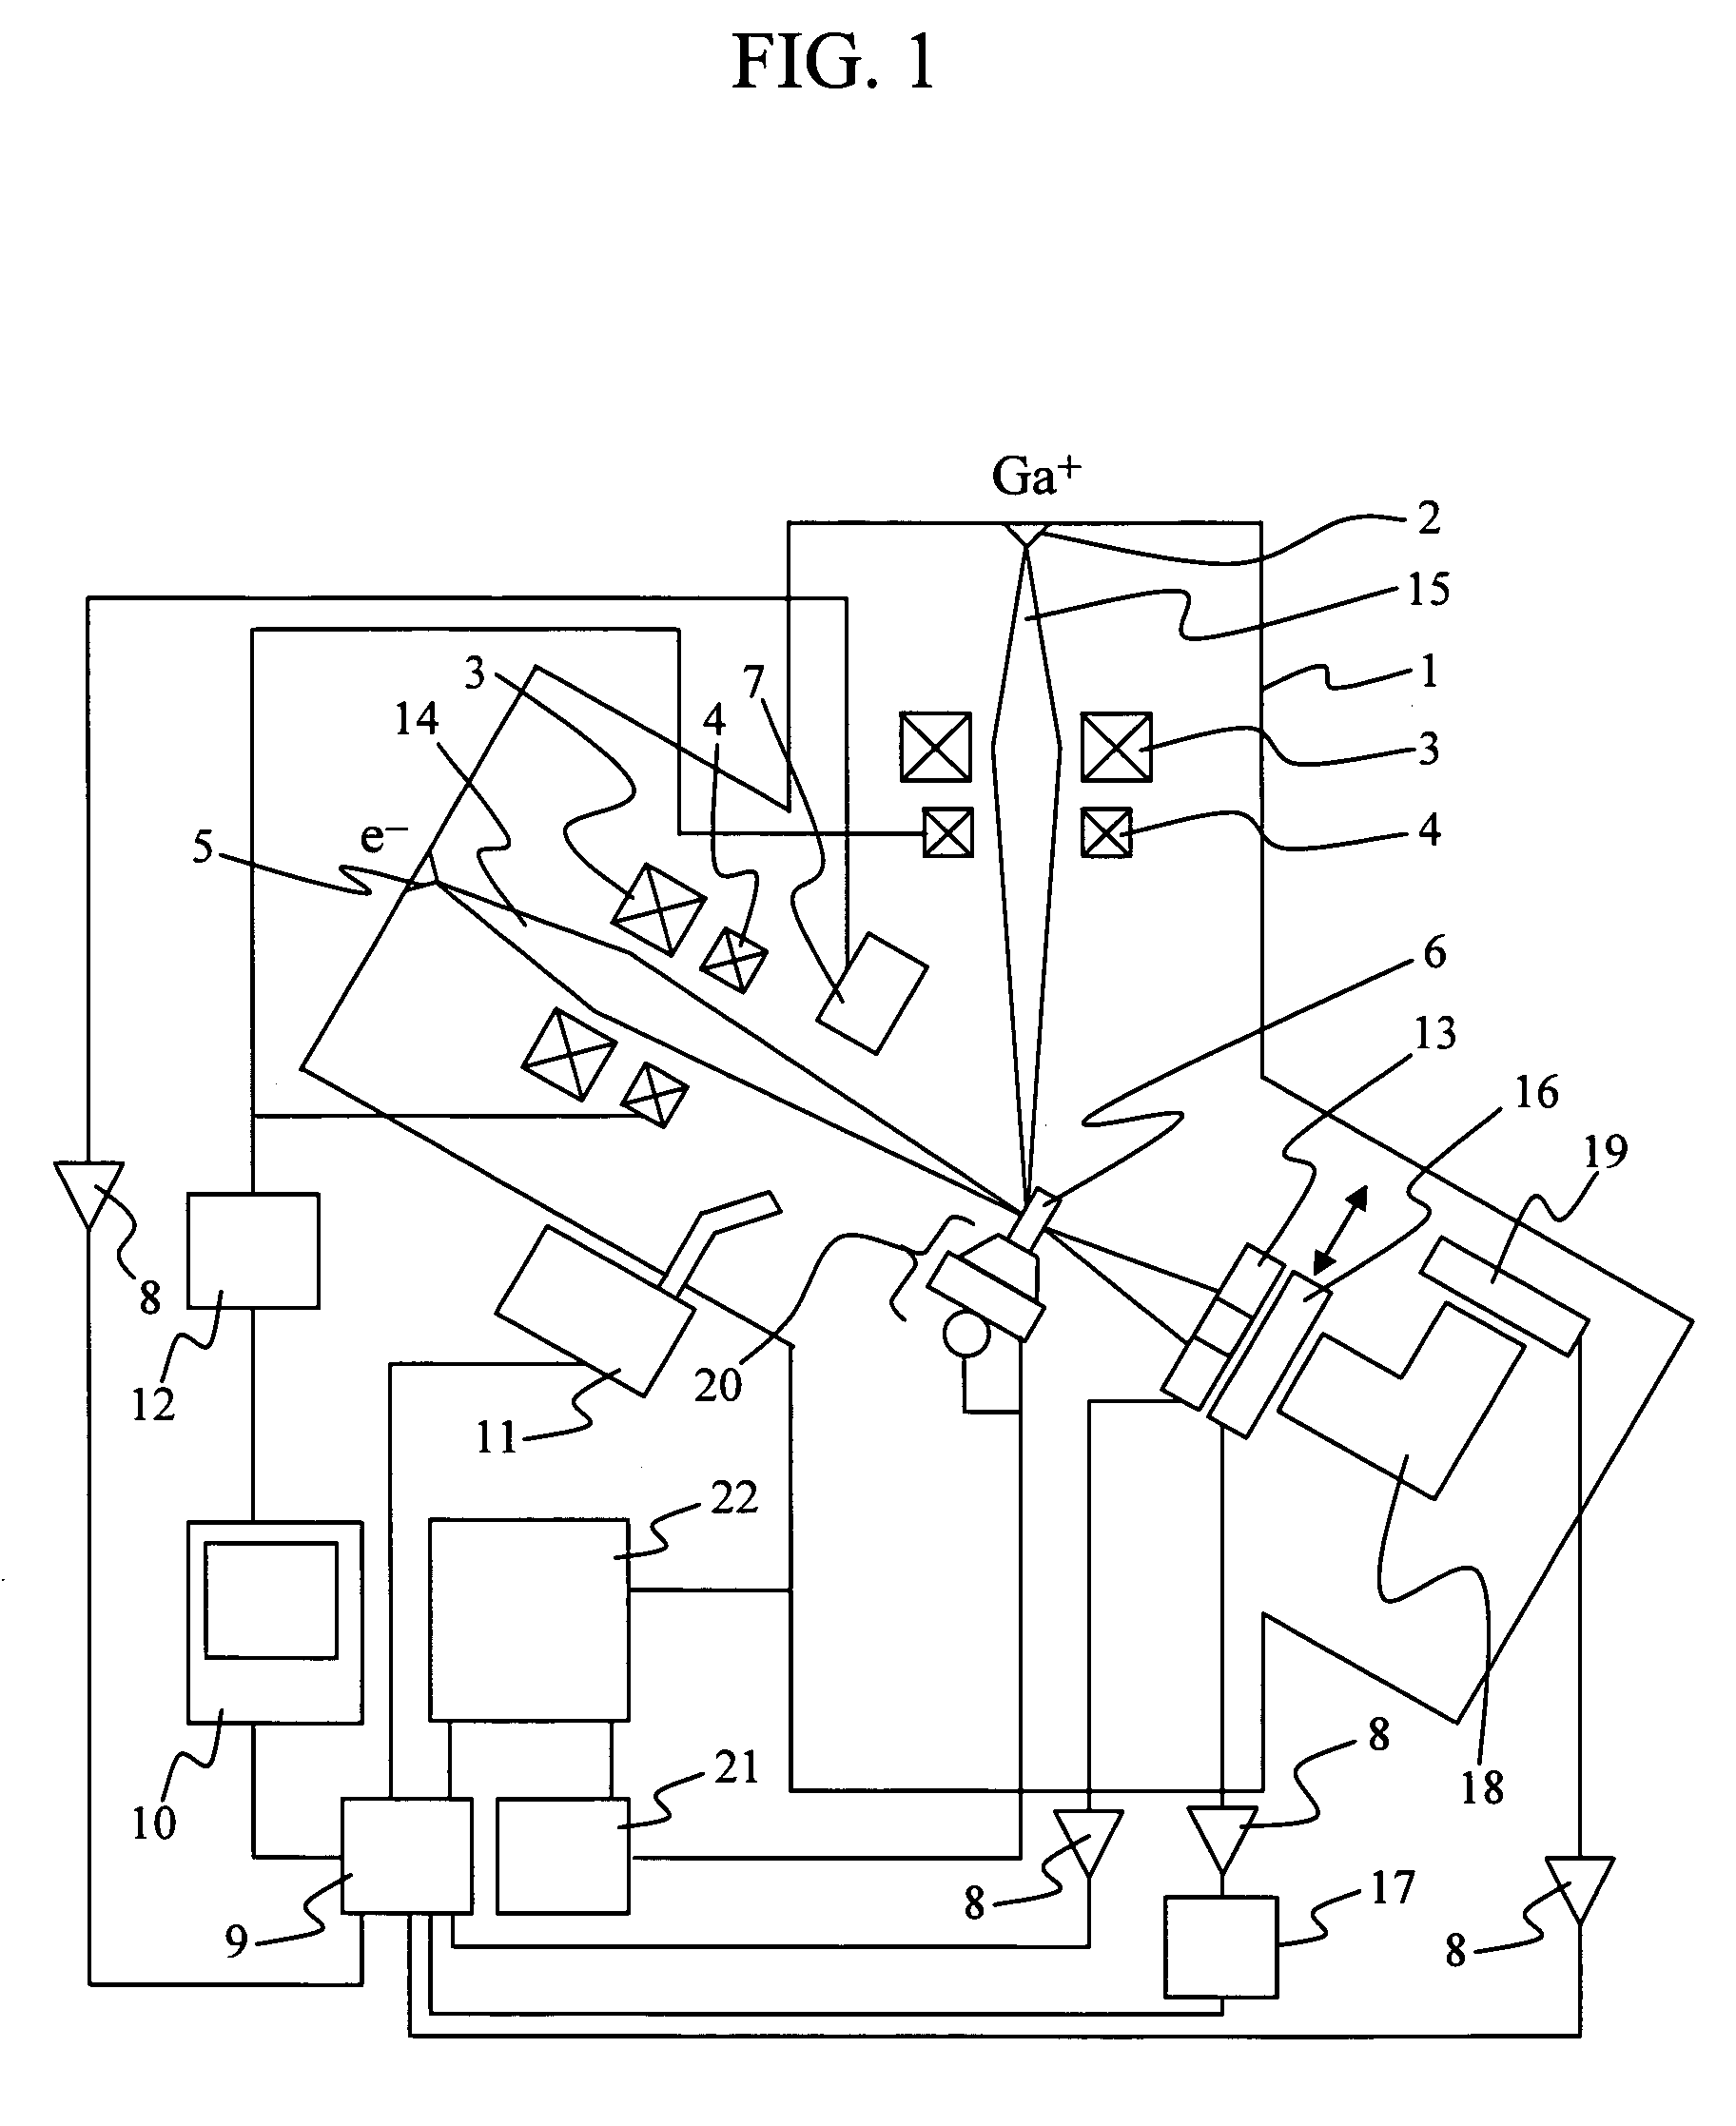 Focused ion beam system and a method of sample preparation and observation